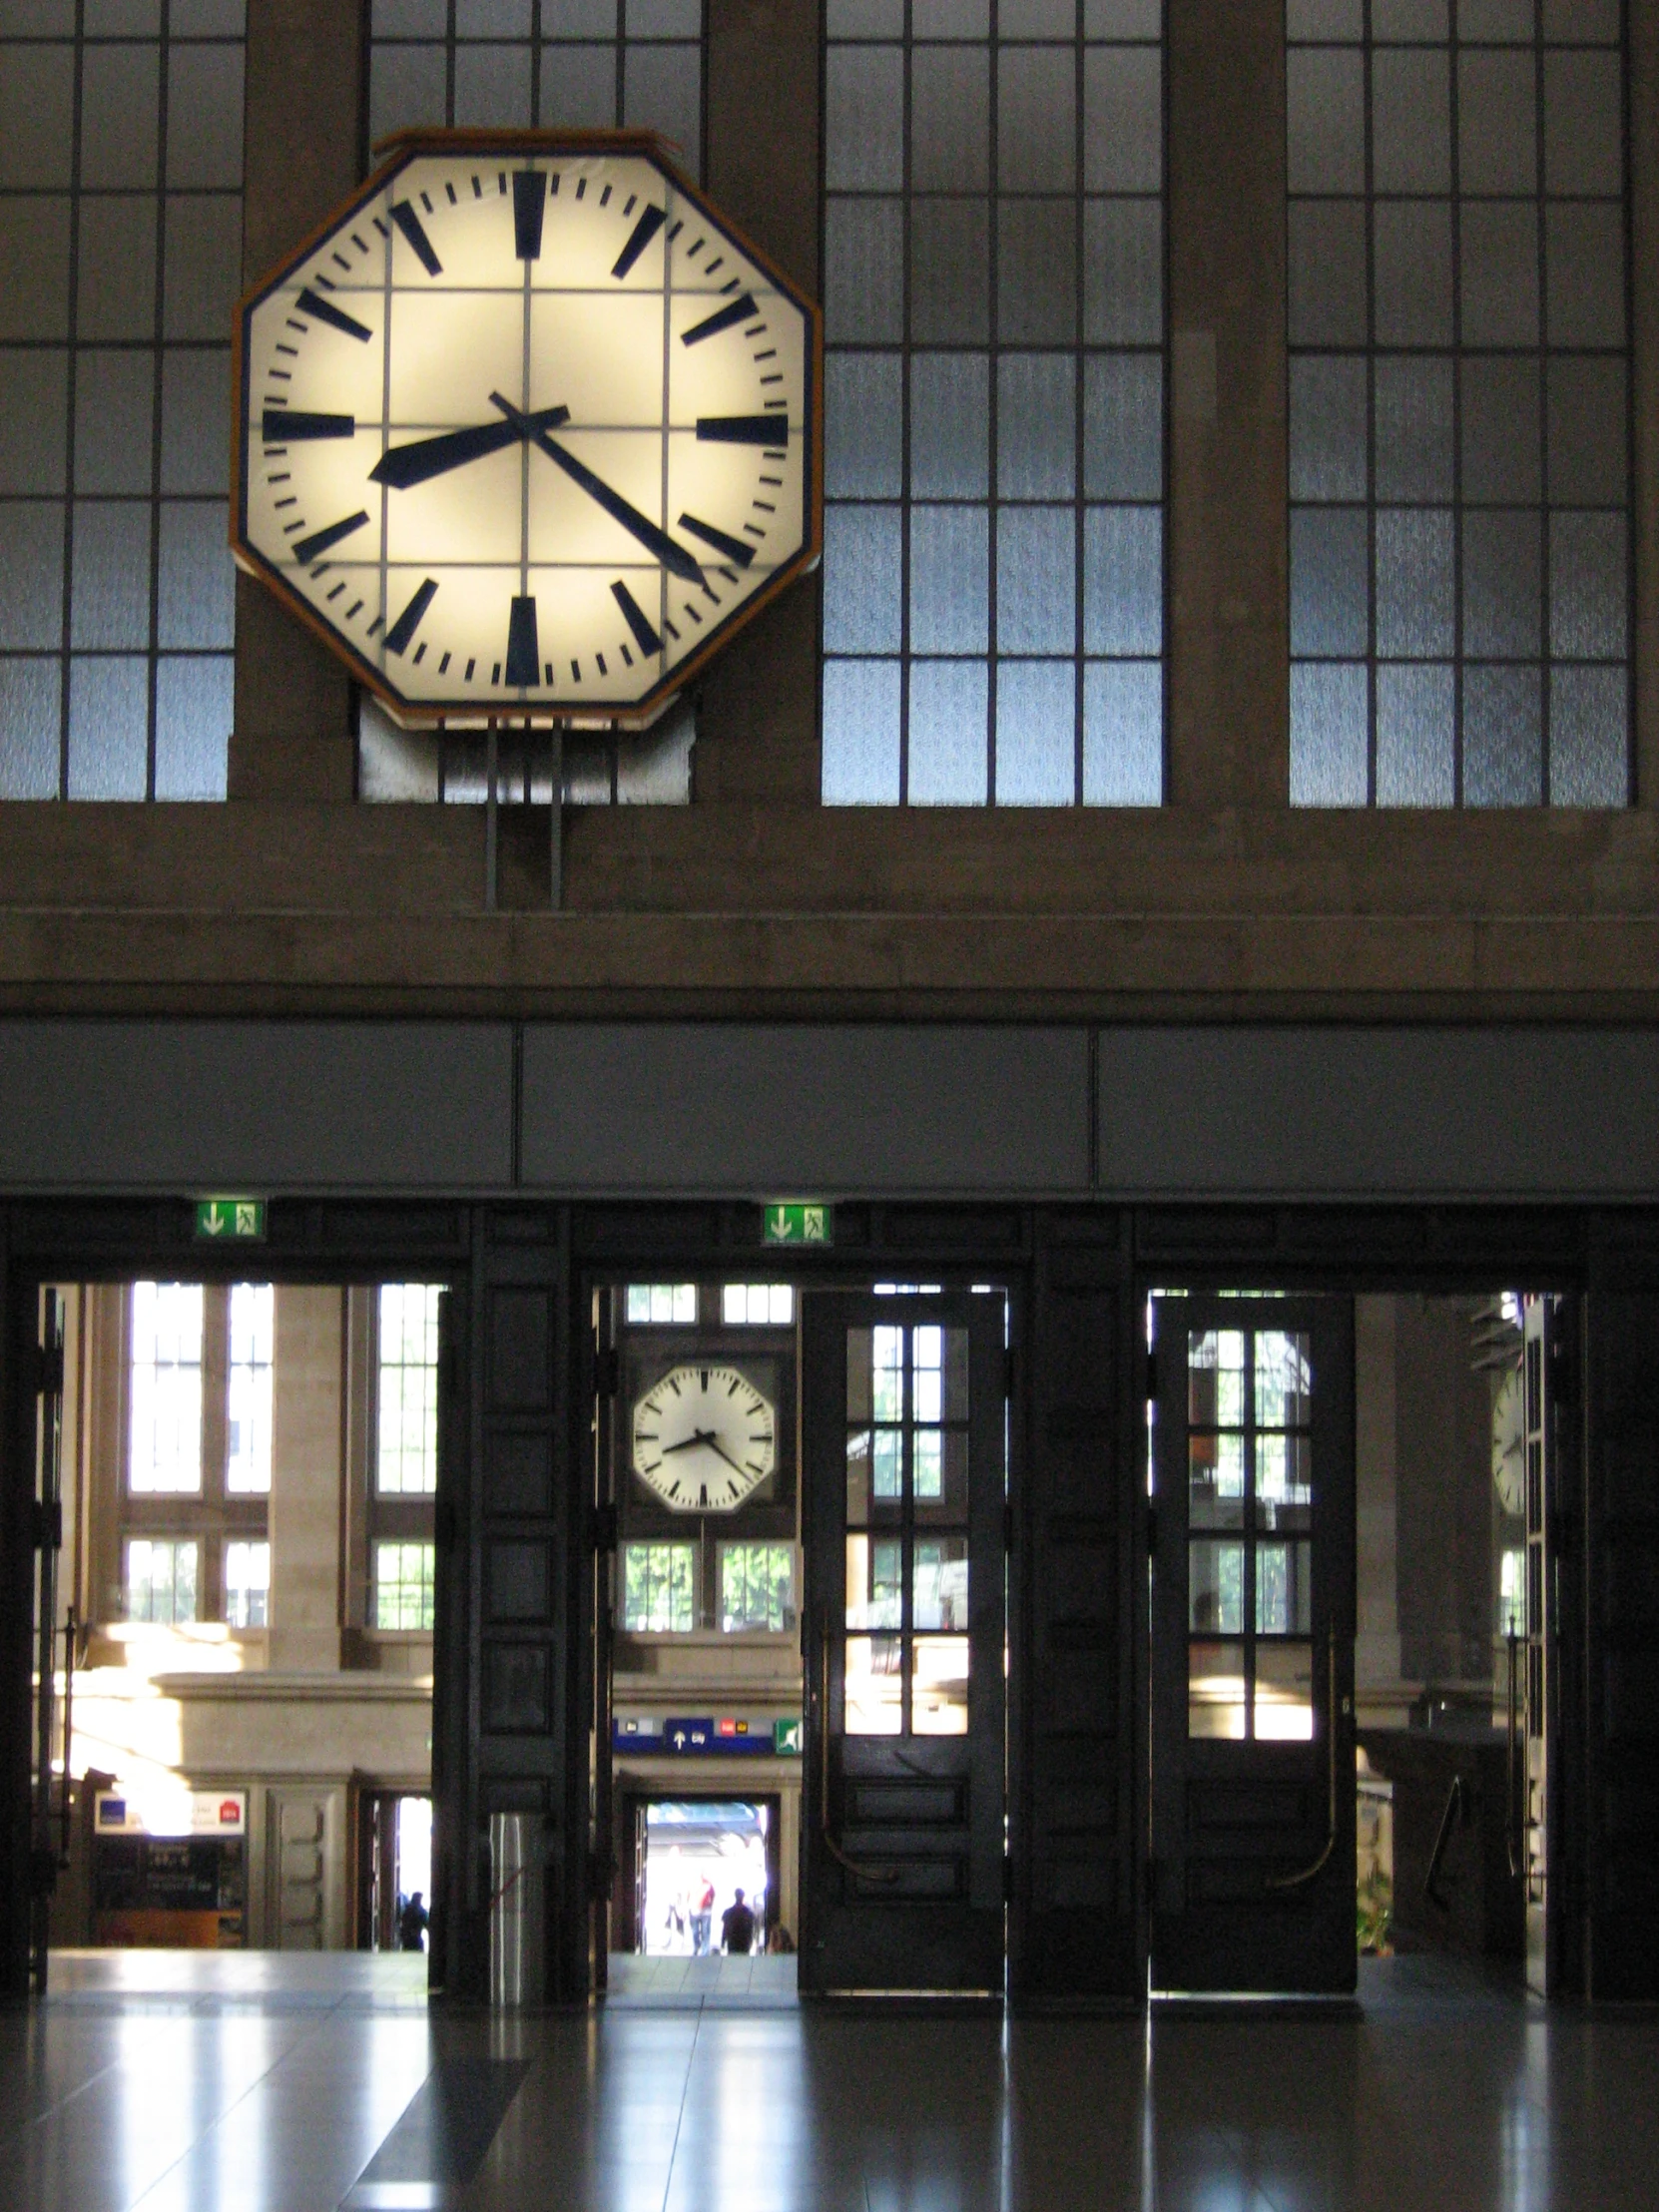 a view of the clock in a building with multiple windows